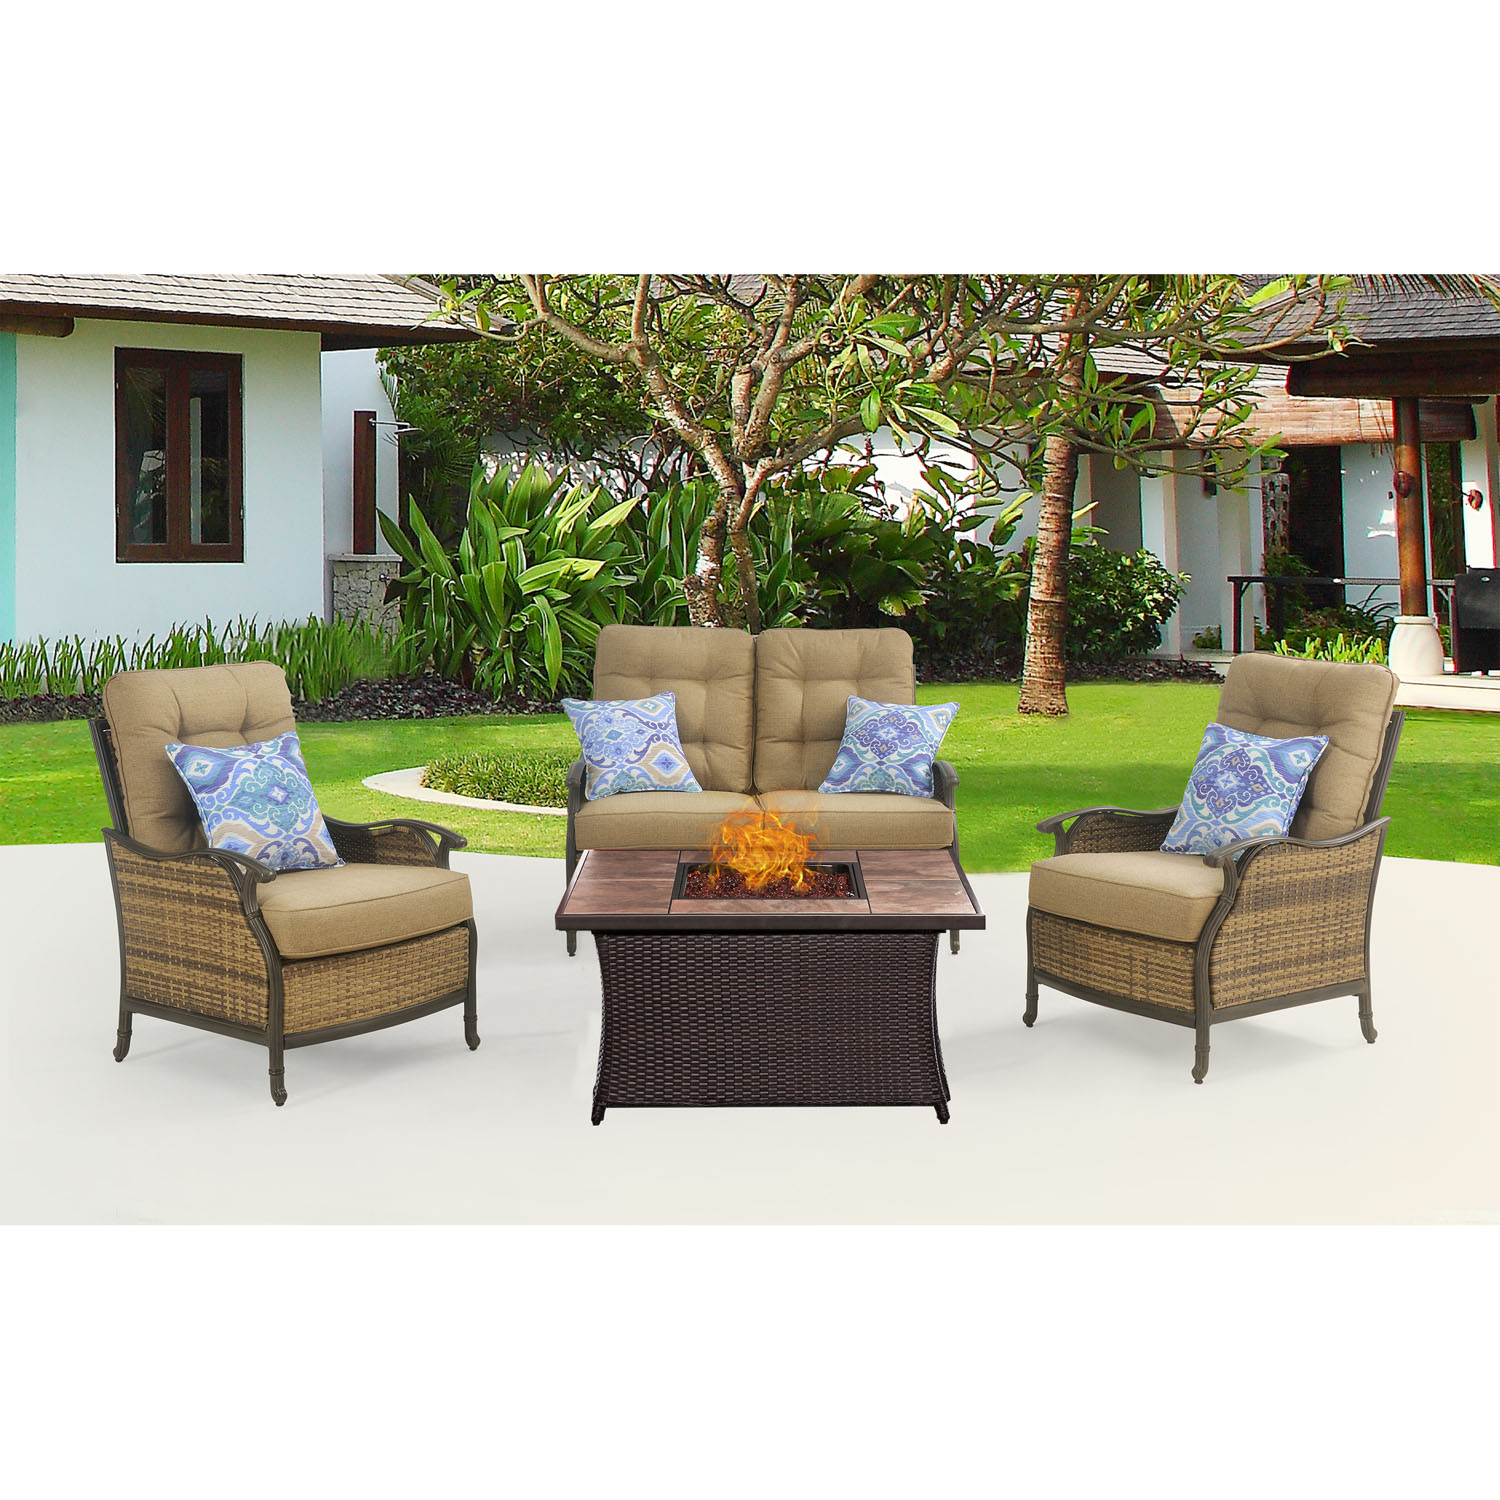 Hanover Hudson Square 4-Piece Fire Pit Lounge Set with Faux-Stone Tile Top - image 1 of 12